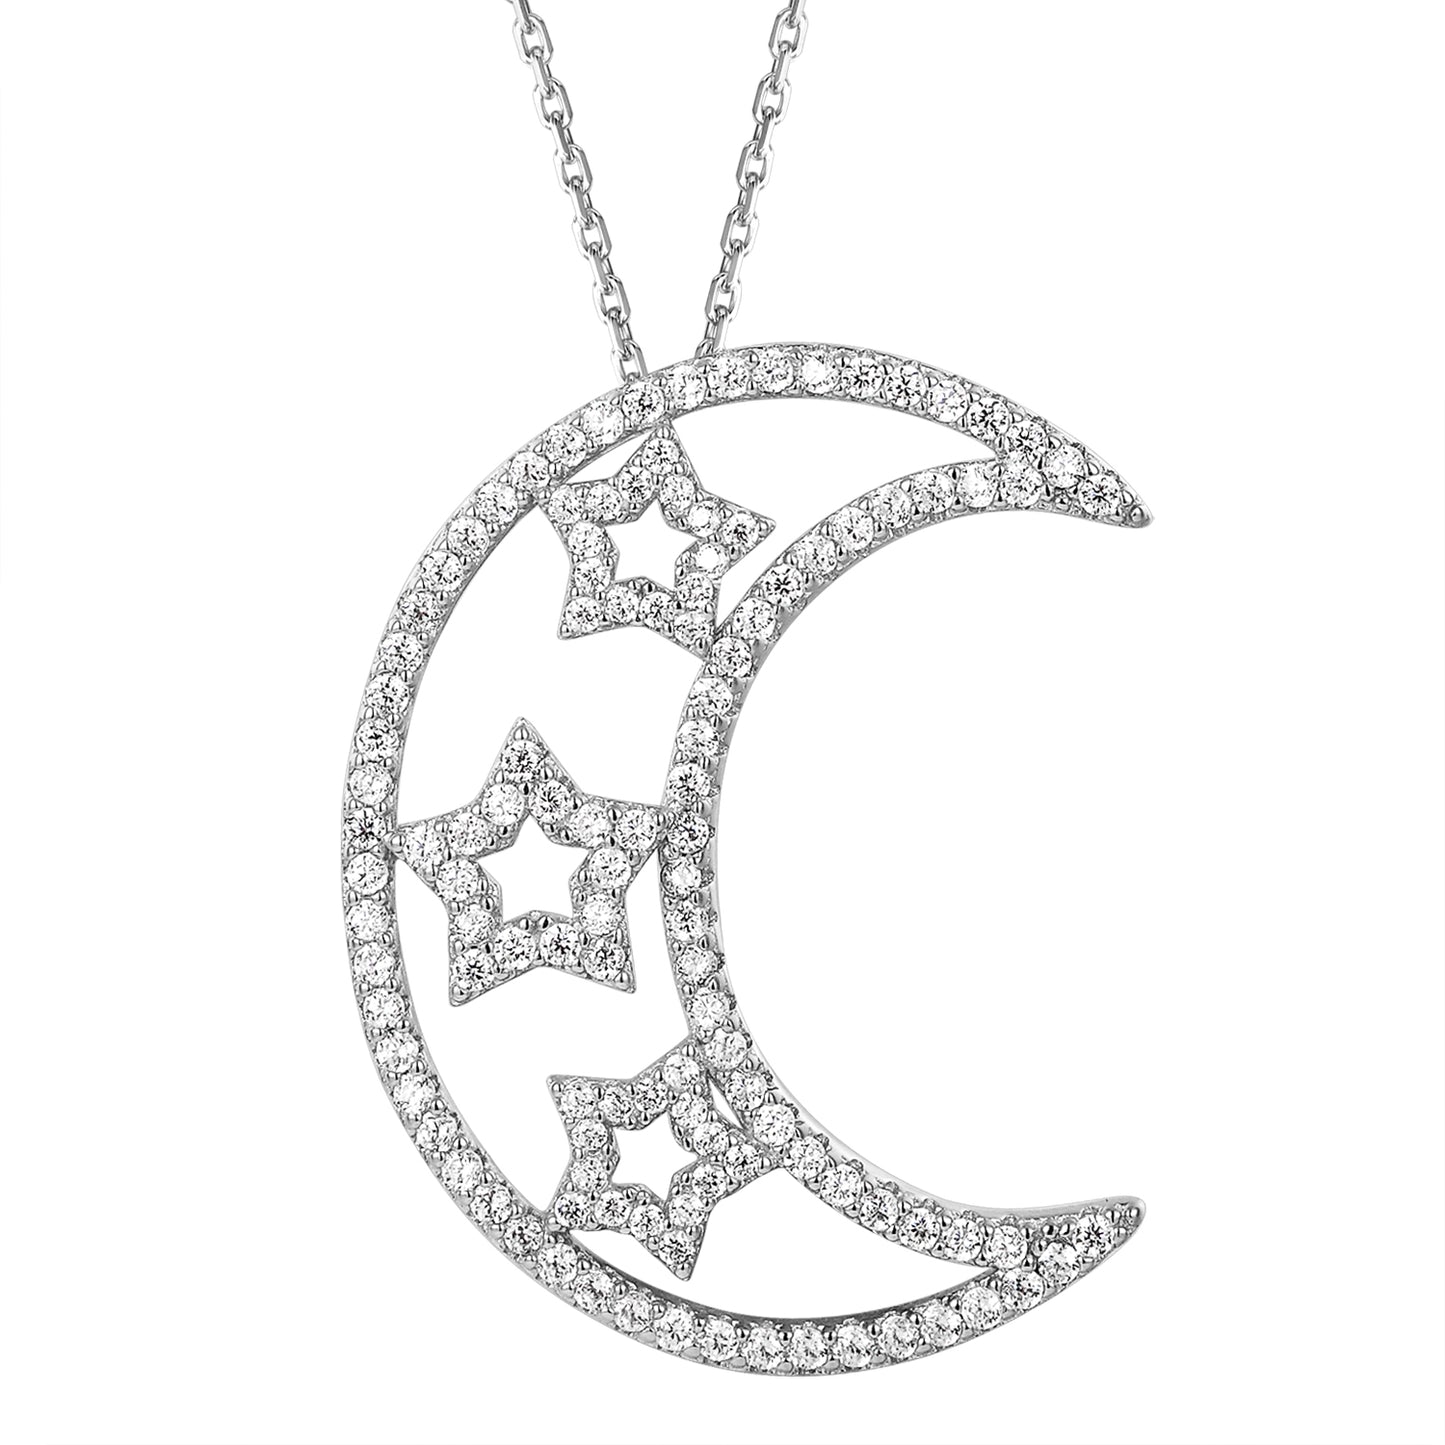 Sterling Silver Crescent Moon Star Charms Bling Pendant